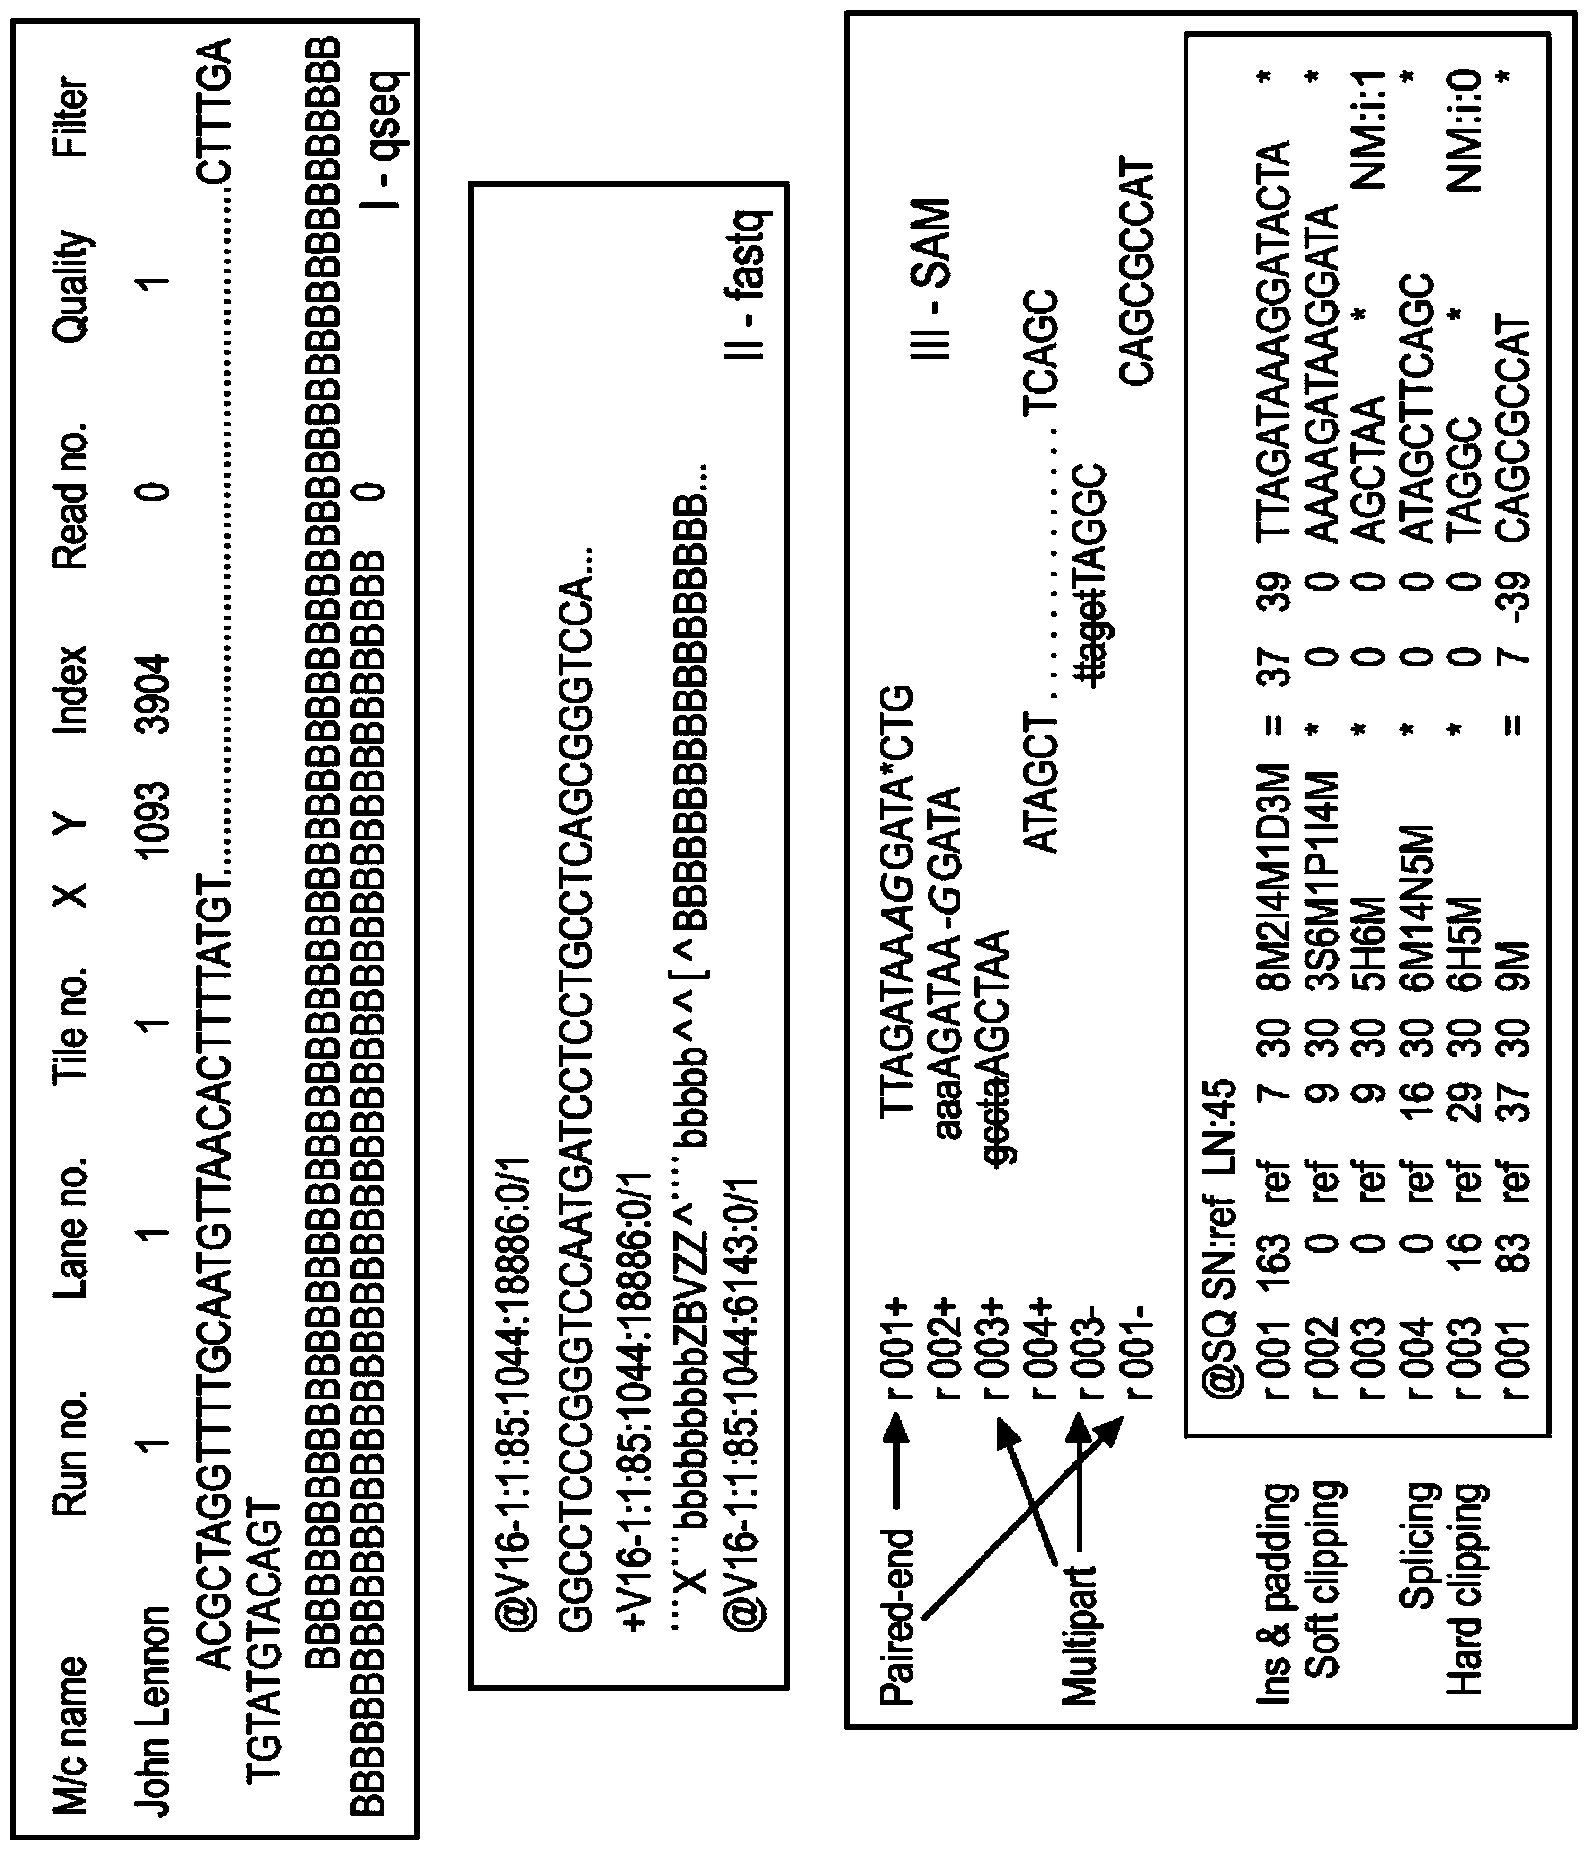 Method for assembly of nucleic acid sequence data